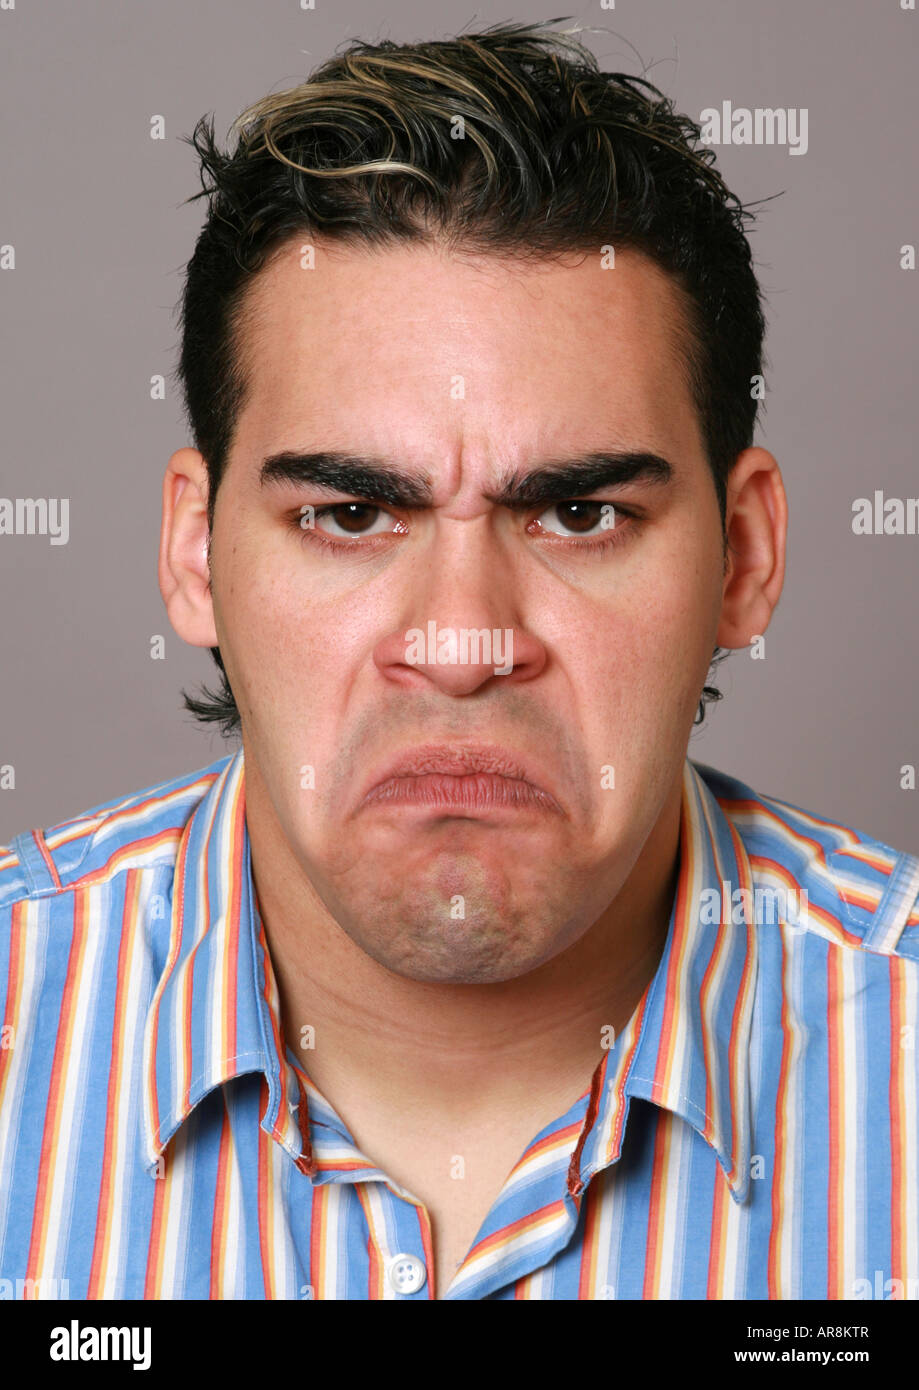 young man with a funny face Stock Photo